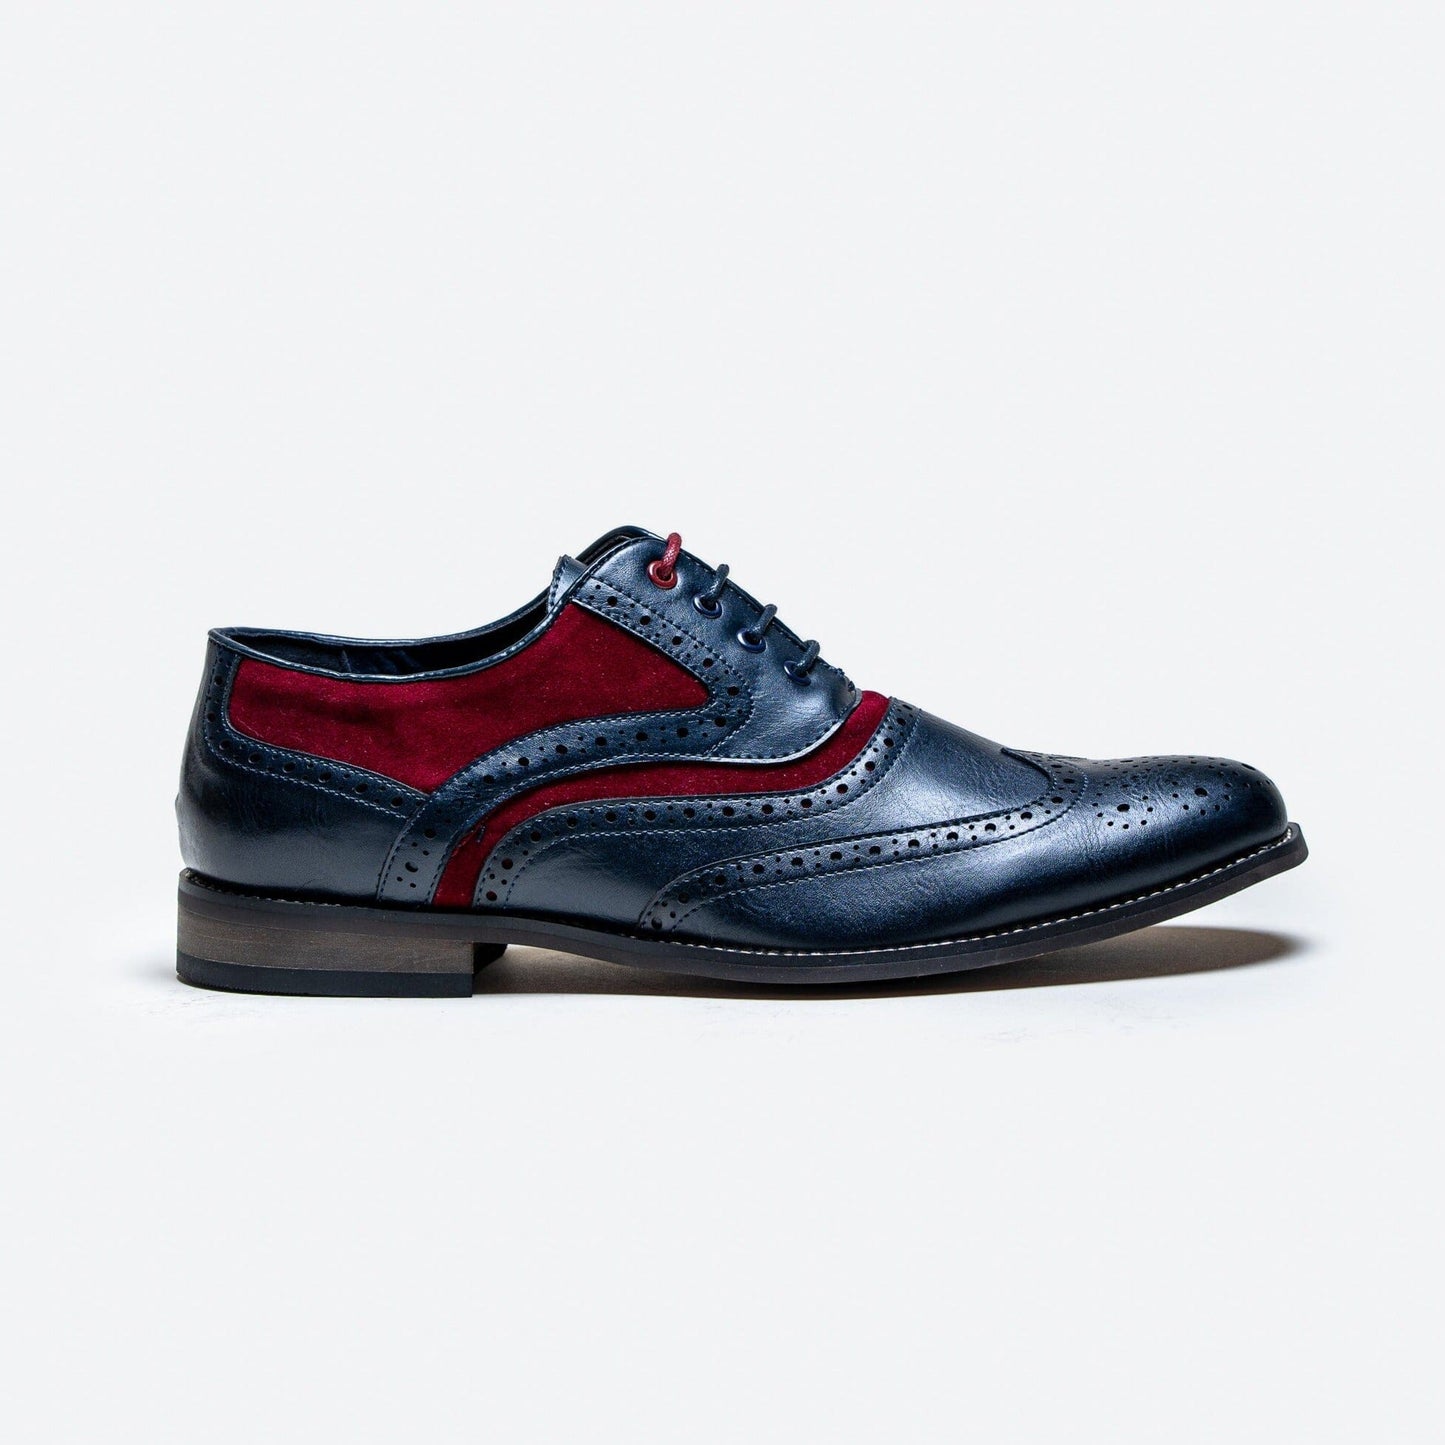 Russel Navy & Red Brogue Shoes - Shoes - 7 - THREADPEPPER